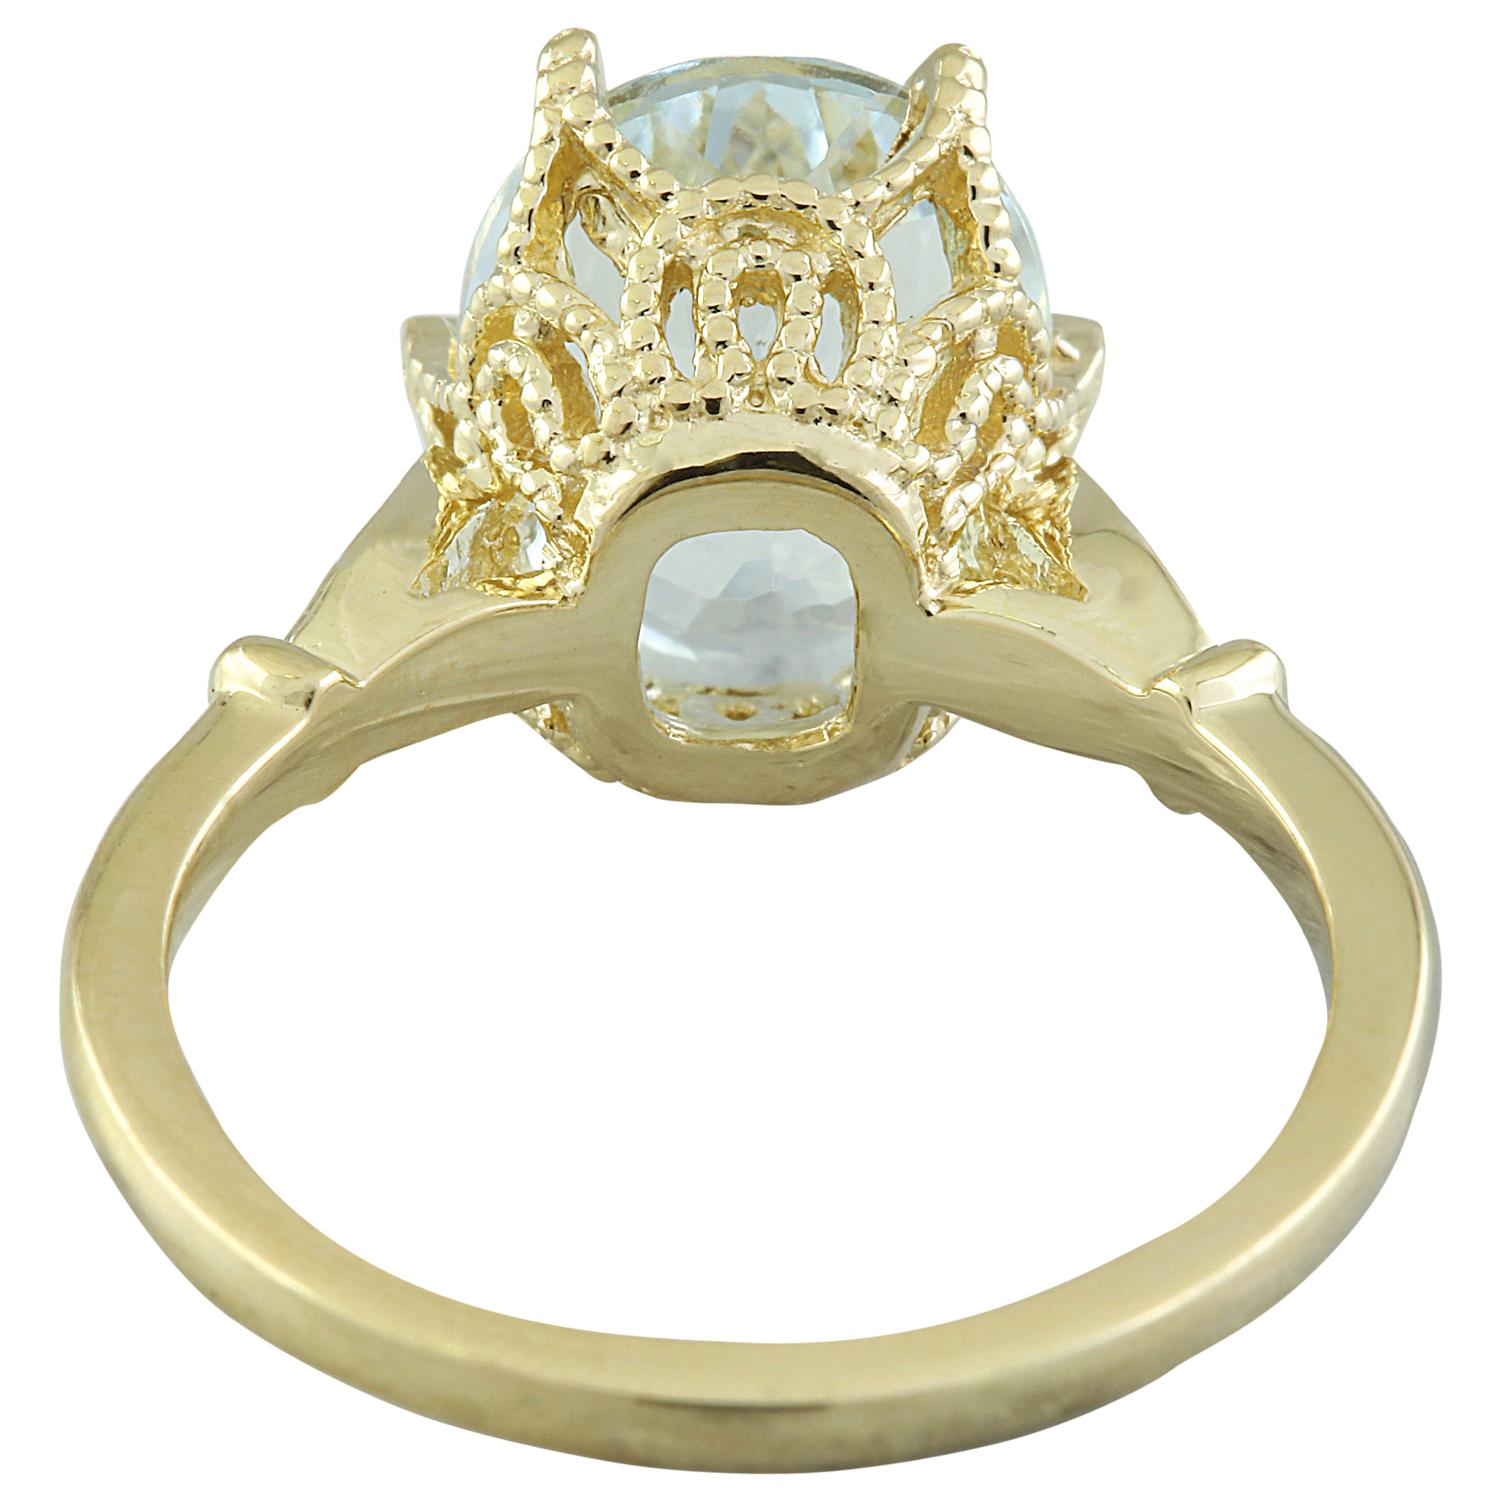 3.70 Carat Natural Aquamarine 14 Karat Solid Yellow Gold Diamond Ring In New Condition For Sale In Los Angeles, CA